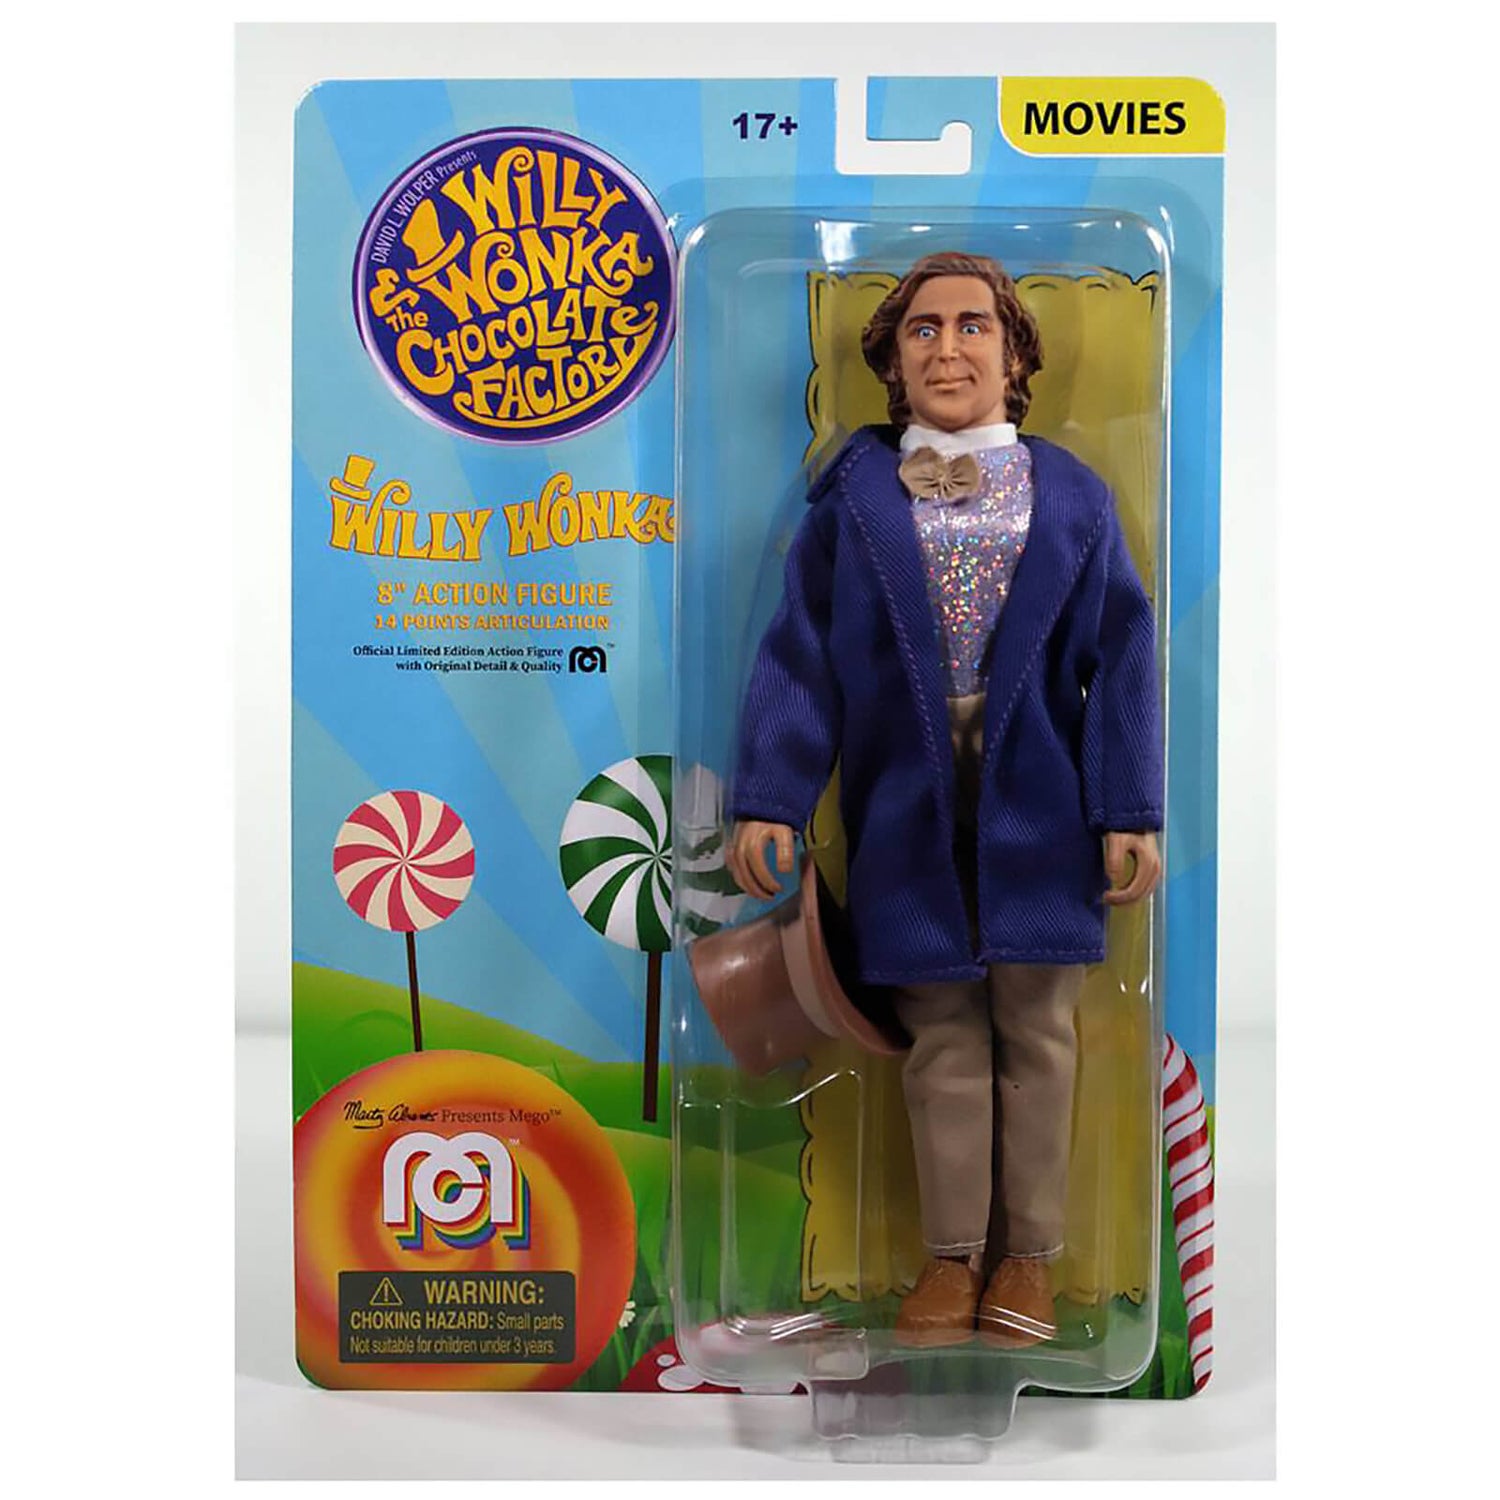 Mego 8" Figure - Willy Wonka and the Chocolate Factory (Gene Wilder)